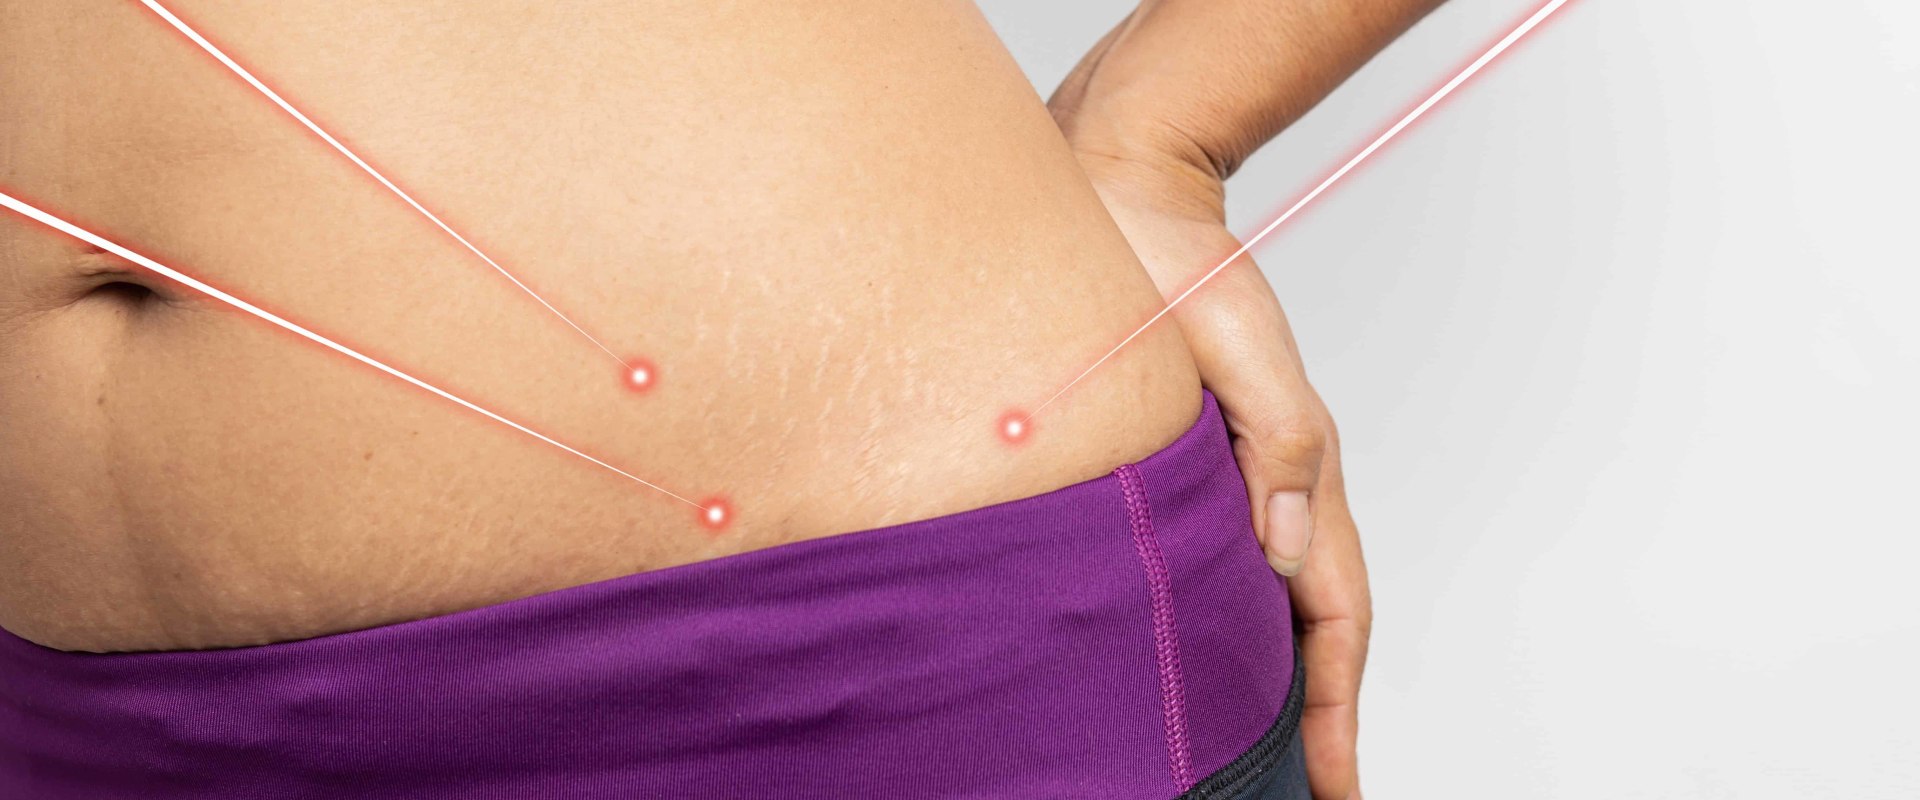 Does laser lipo get rid of belly fat?